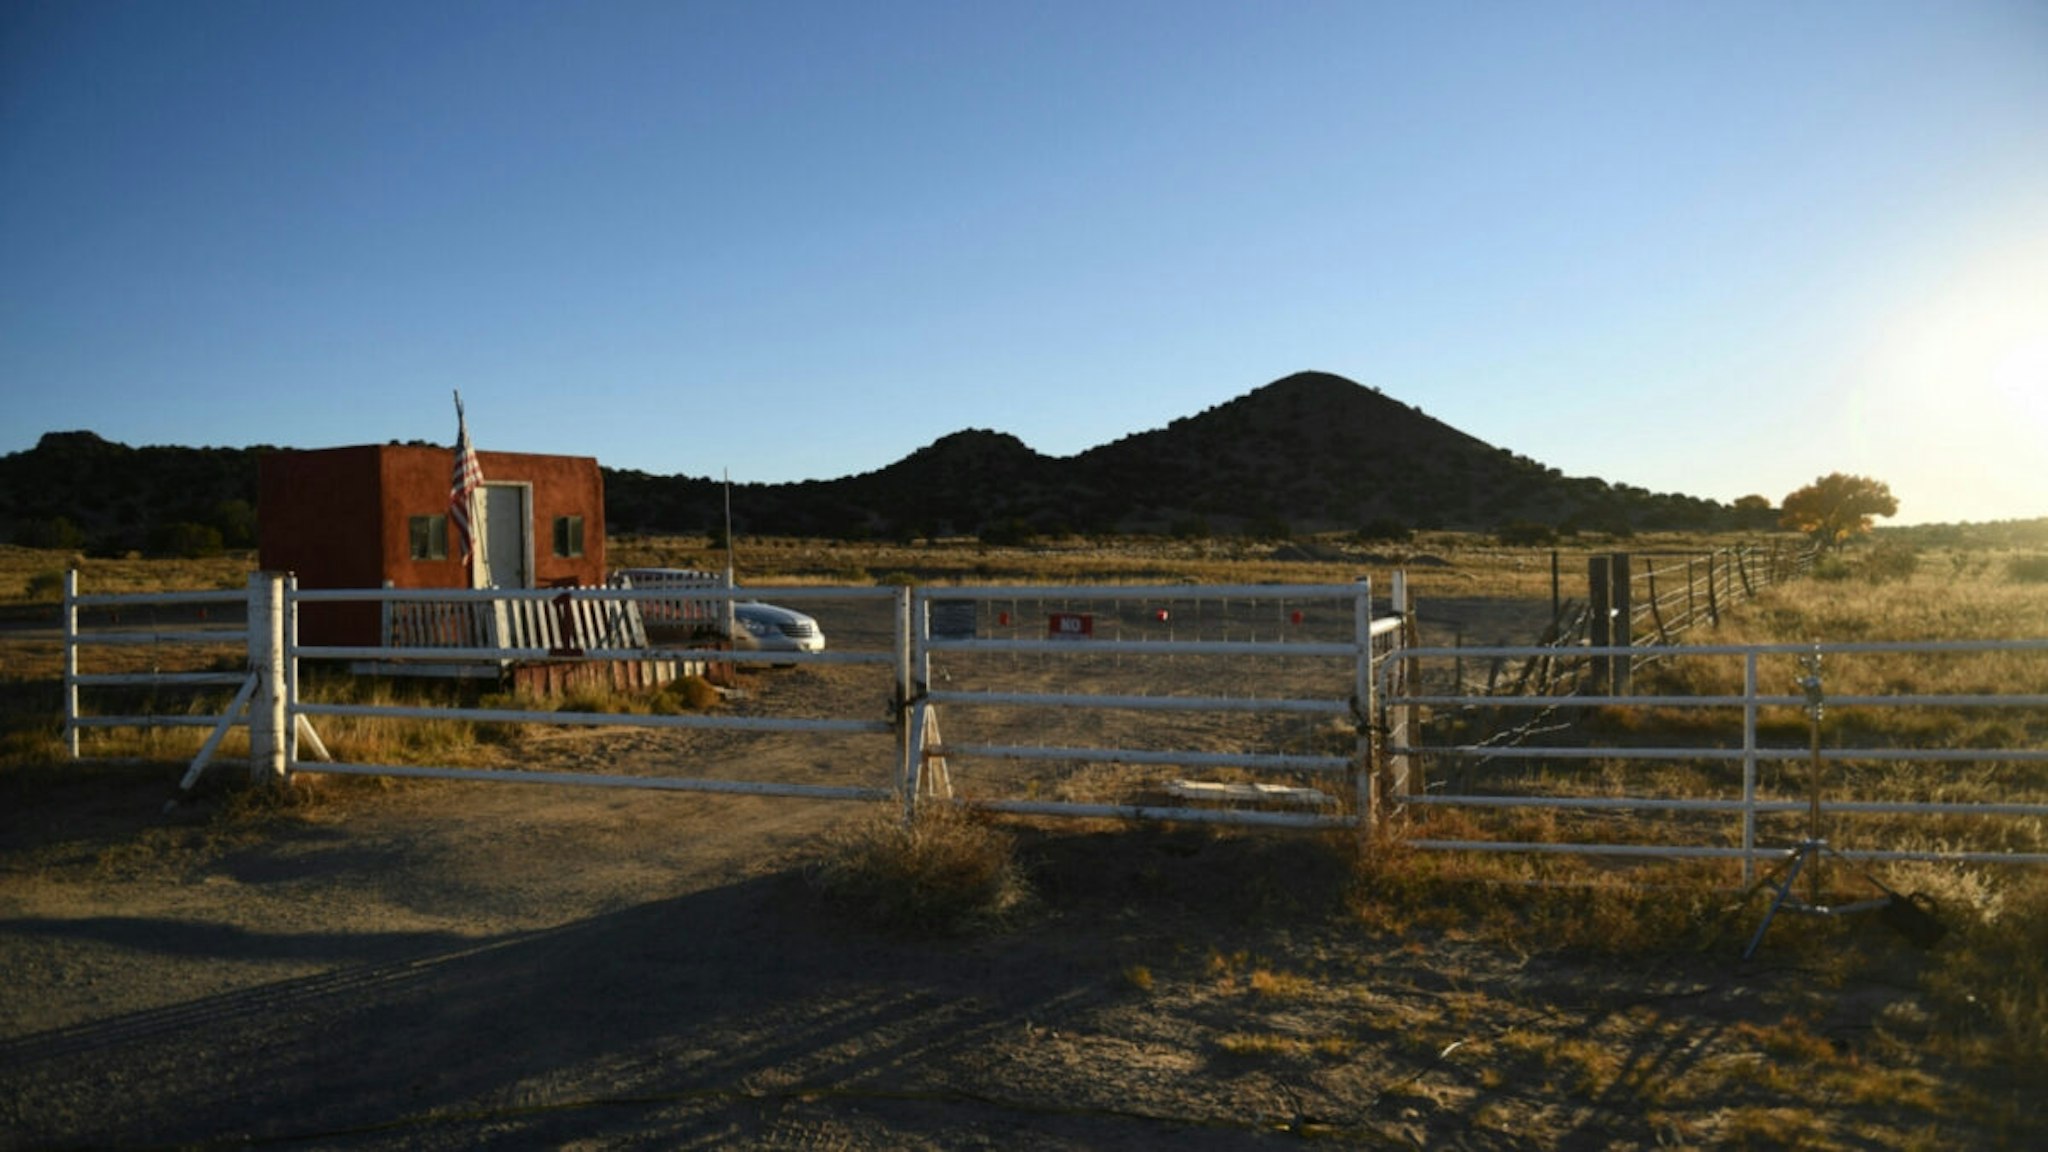 The entrance to the Bonanza Creek Ranch where the film "rust" was filming, on October 29, 2021 in Santa Fe, New Mexico.